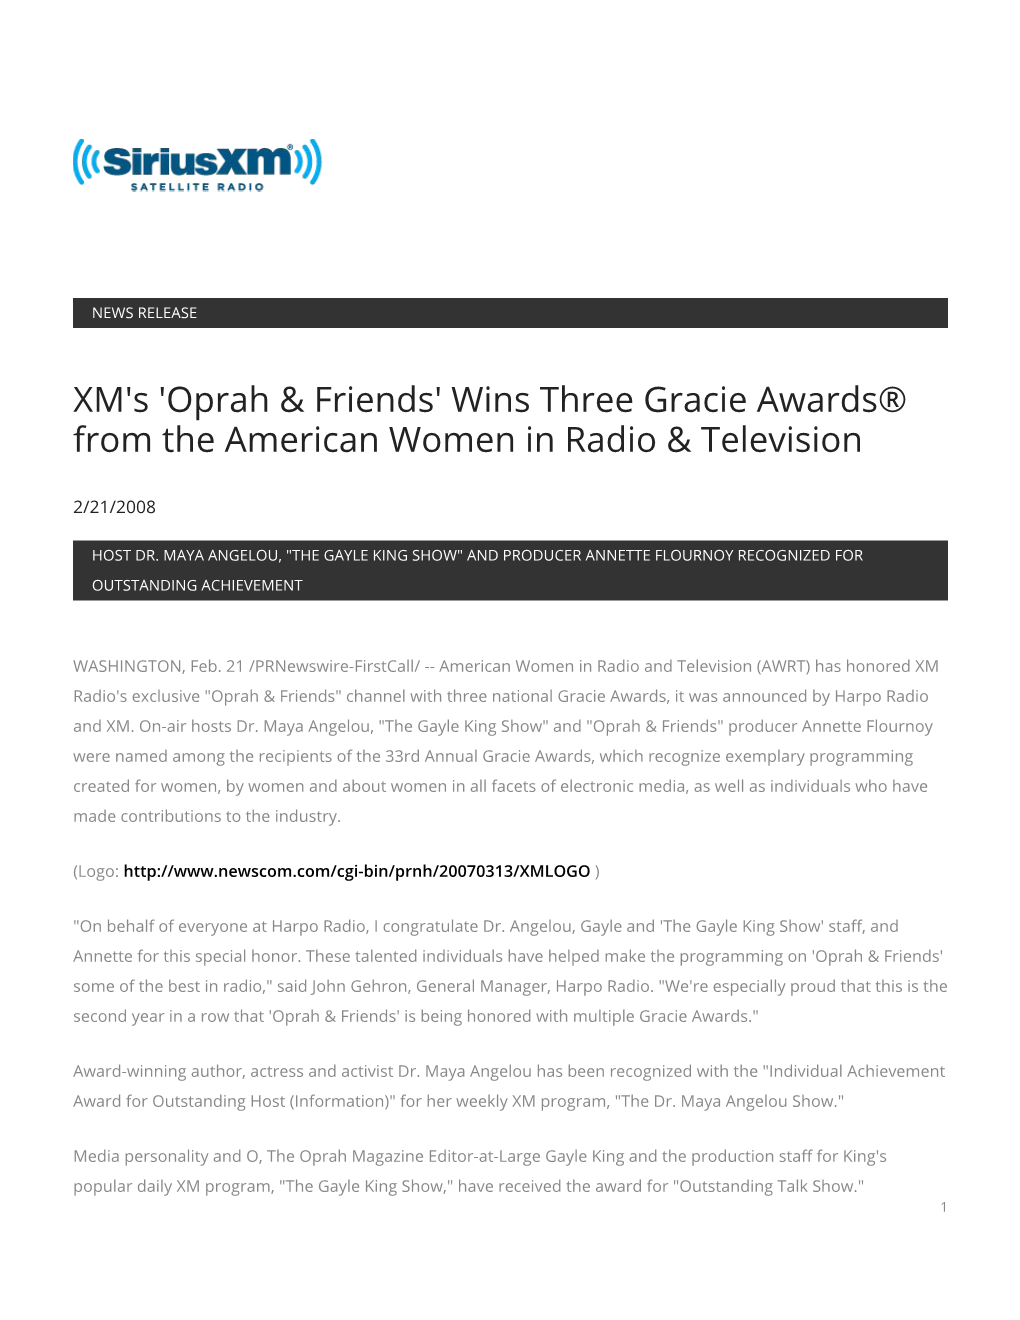 XM's 'Oprah & Friends' Wins Three Gracie Awards® from the American